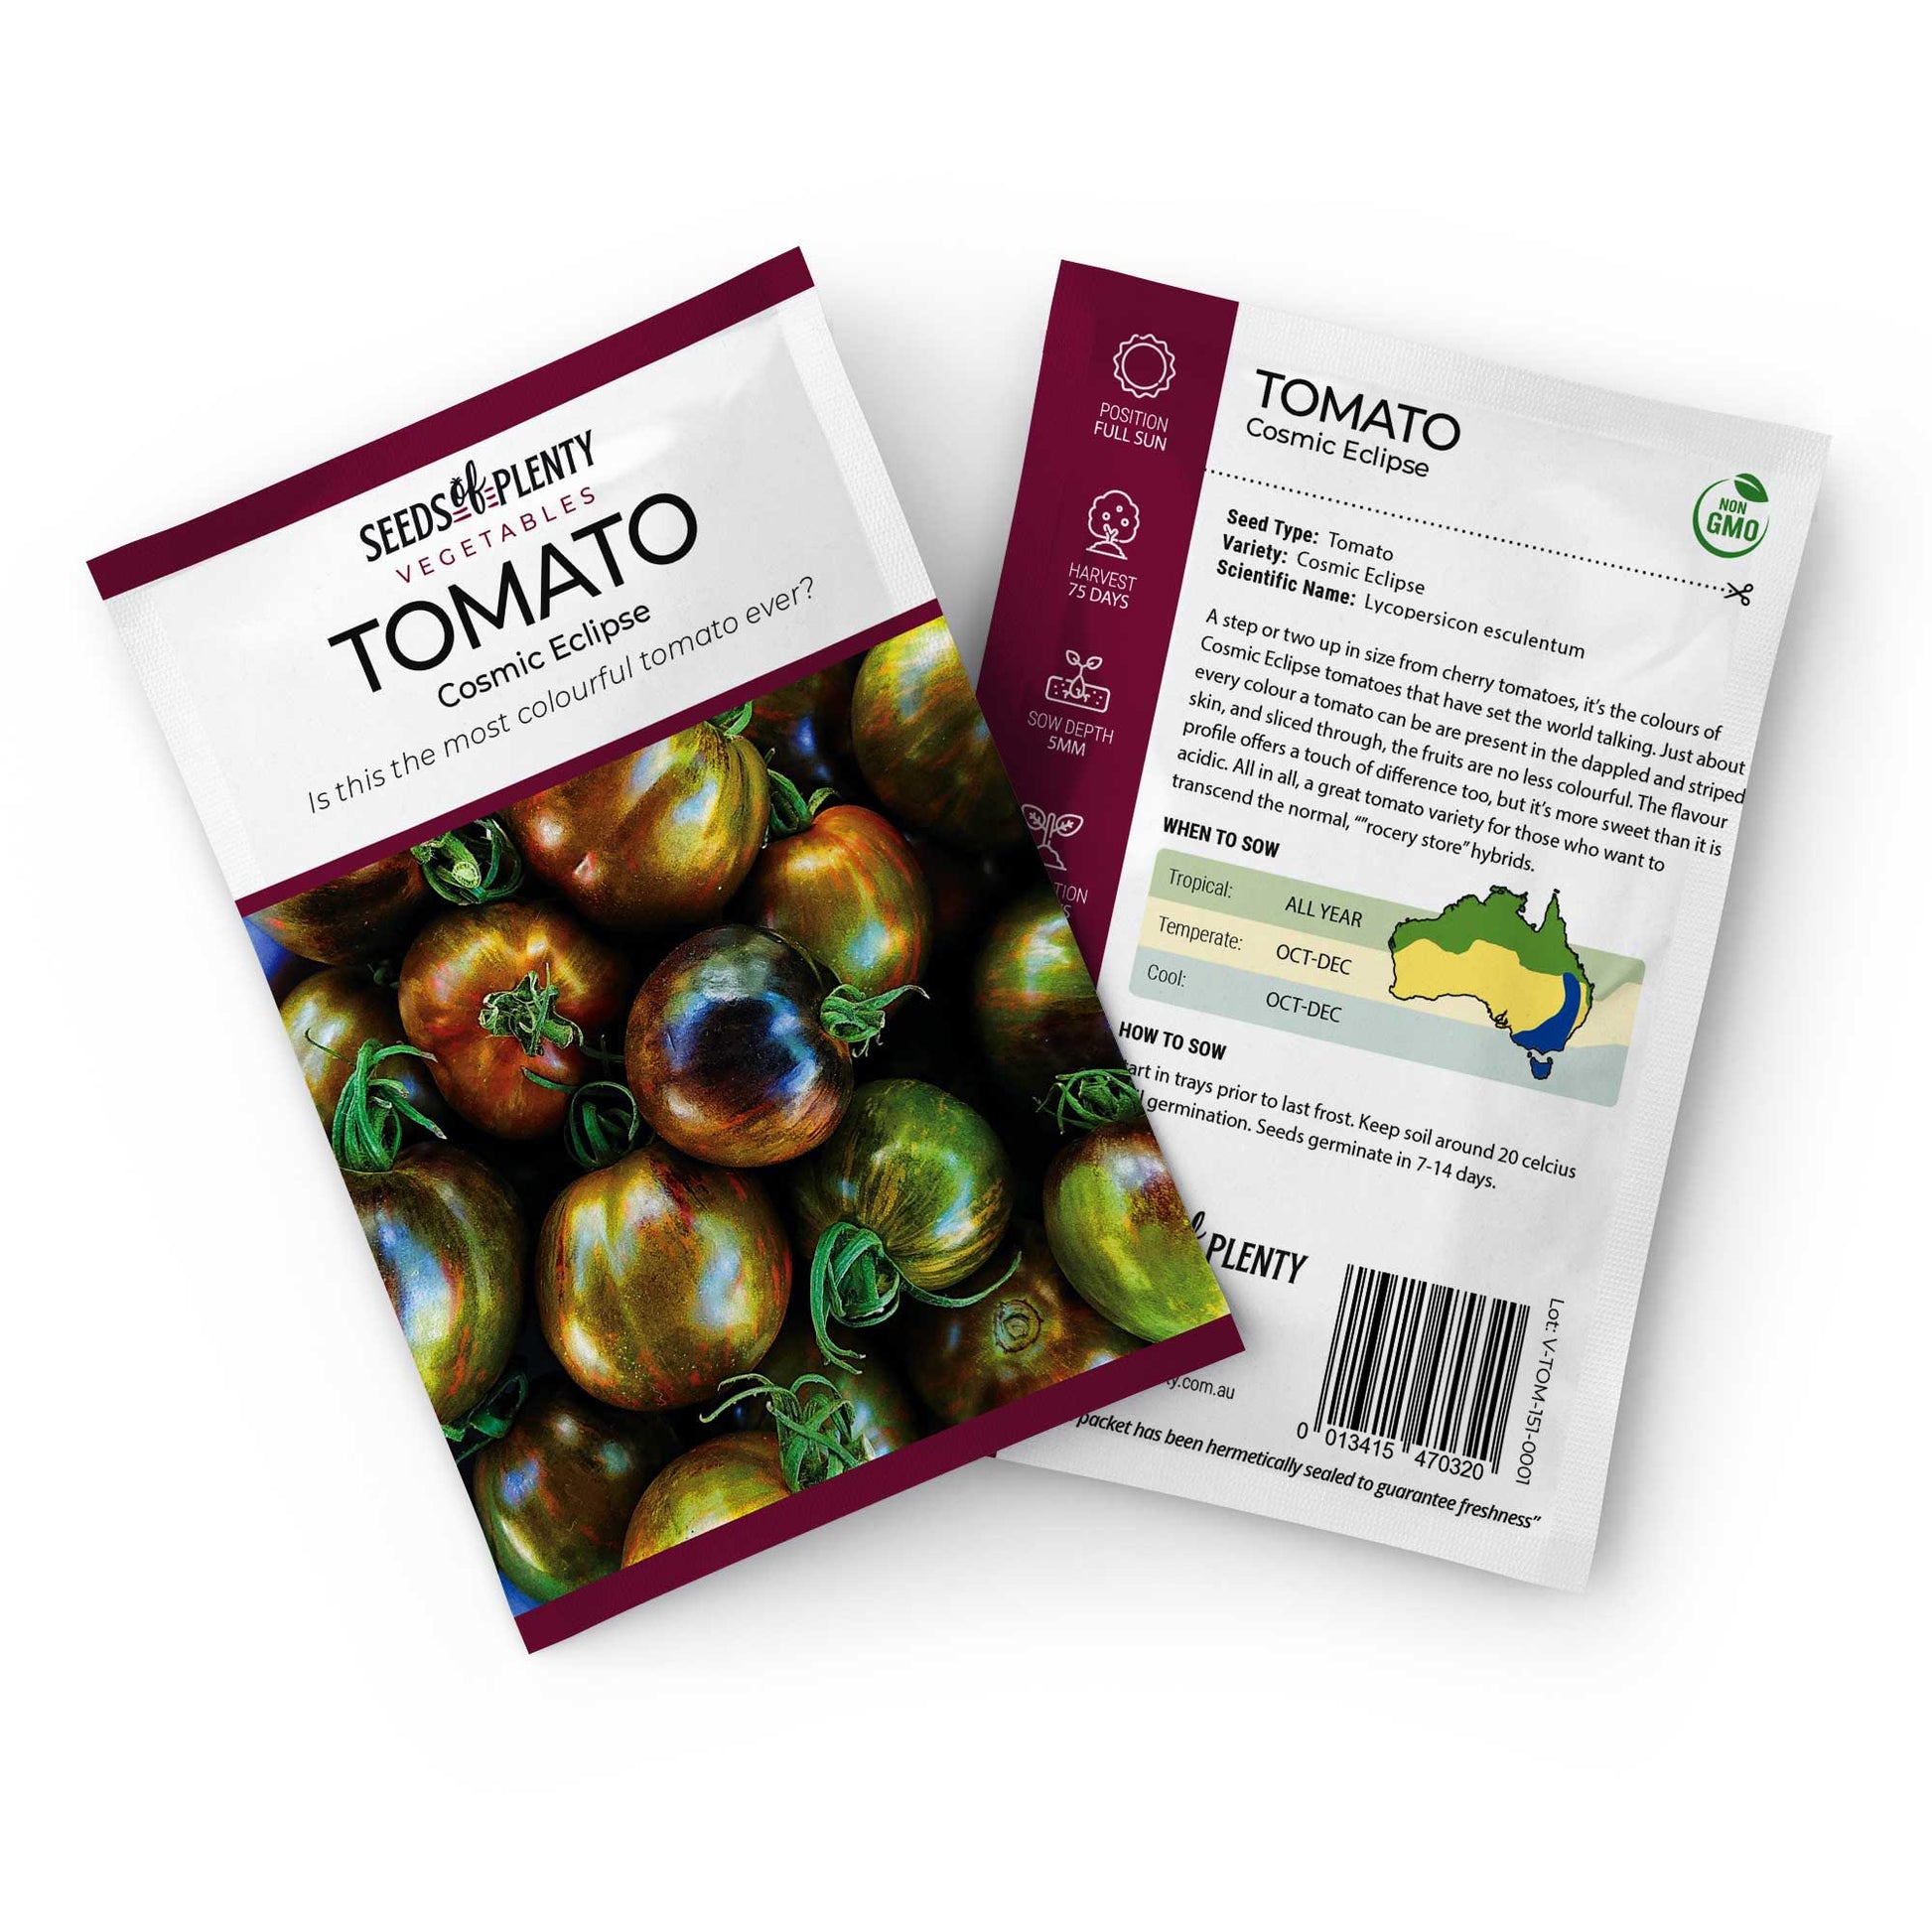 TOMATO - Cosmic Eclipse Seed Packet - Lycopersicon esculentum